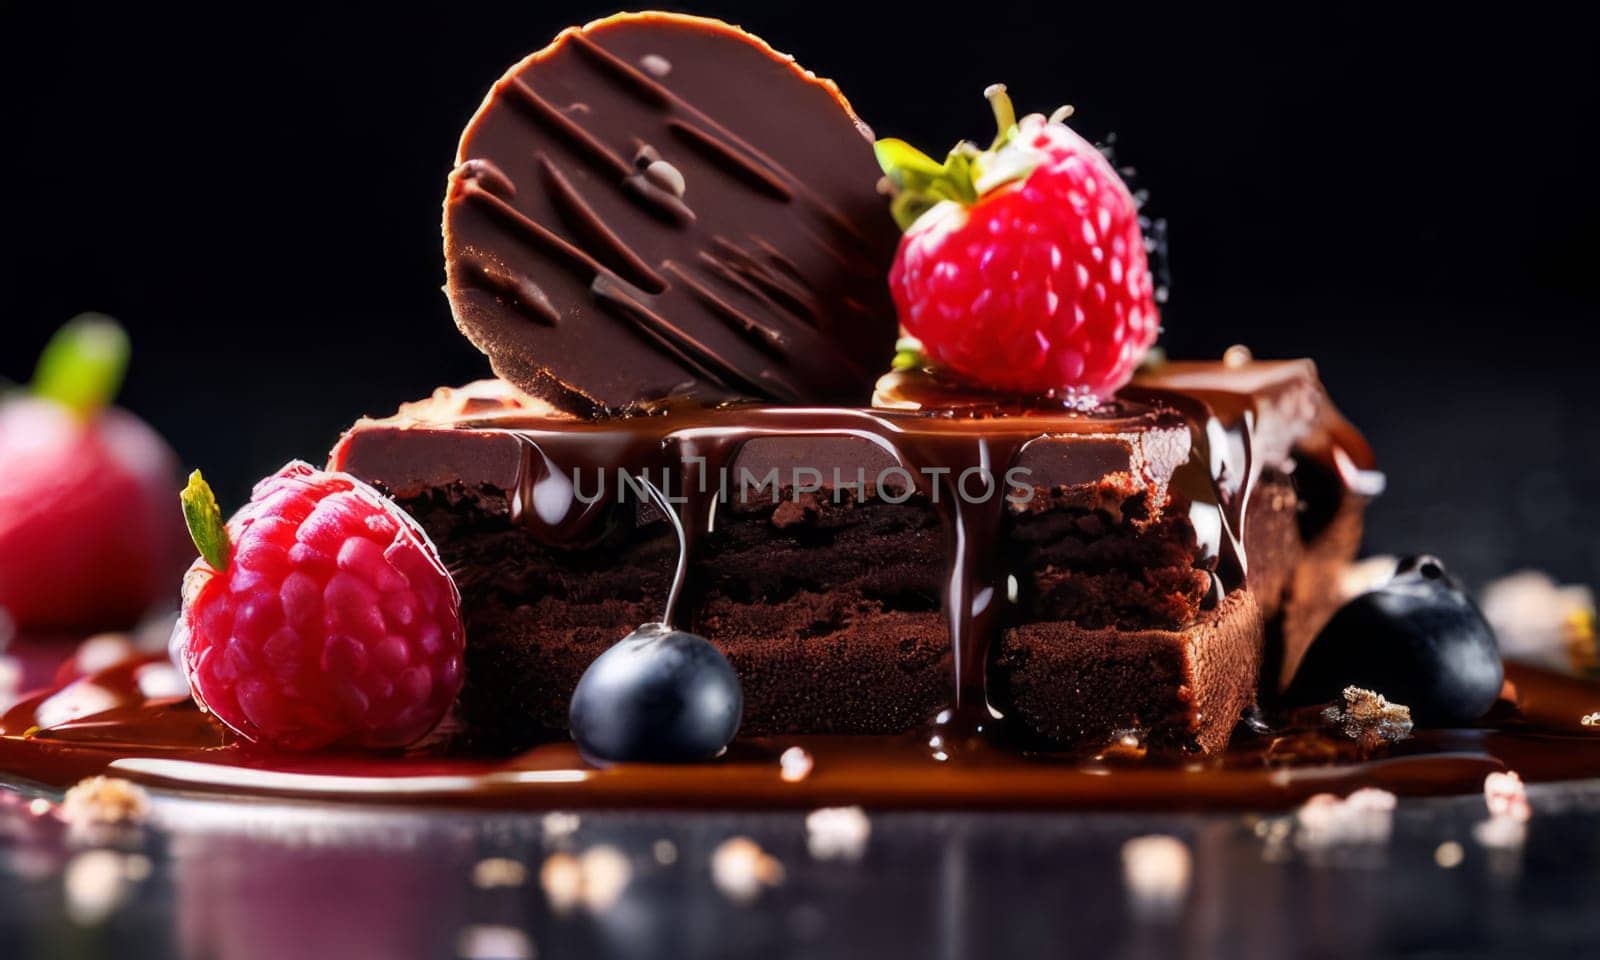 Chocolate cake with raspberries, chocolate sauce. Cake is adorned with fresh raspberries, exquisite chocolate sauce, creating delectable, luxurious dessert. For advertise cafe, patisserie, restaurant. by Angelsmoon